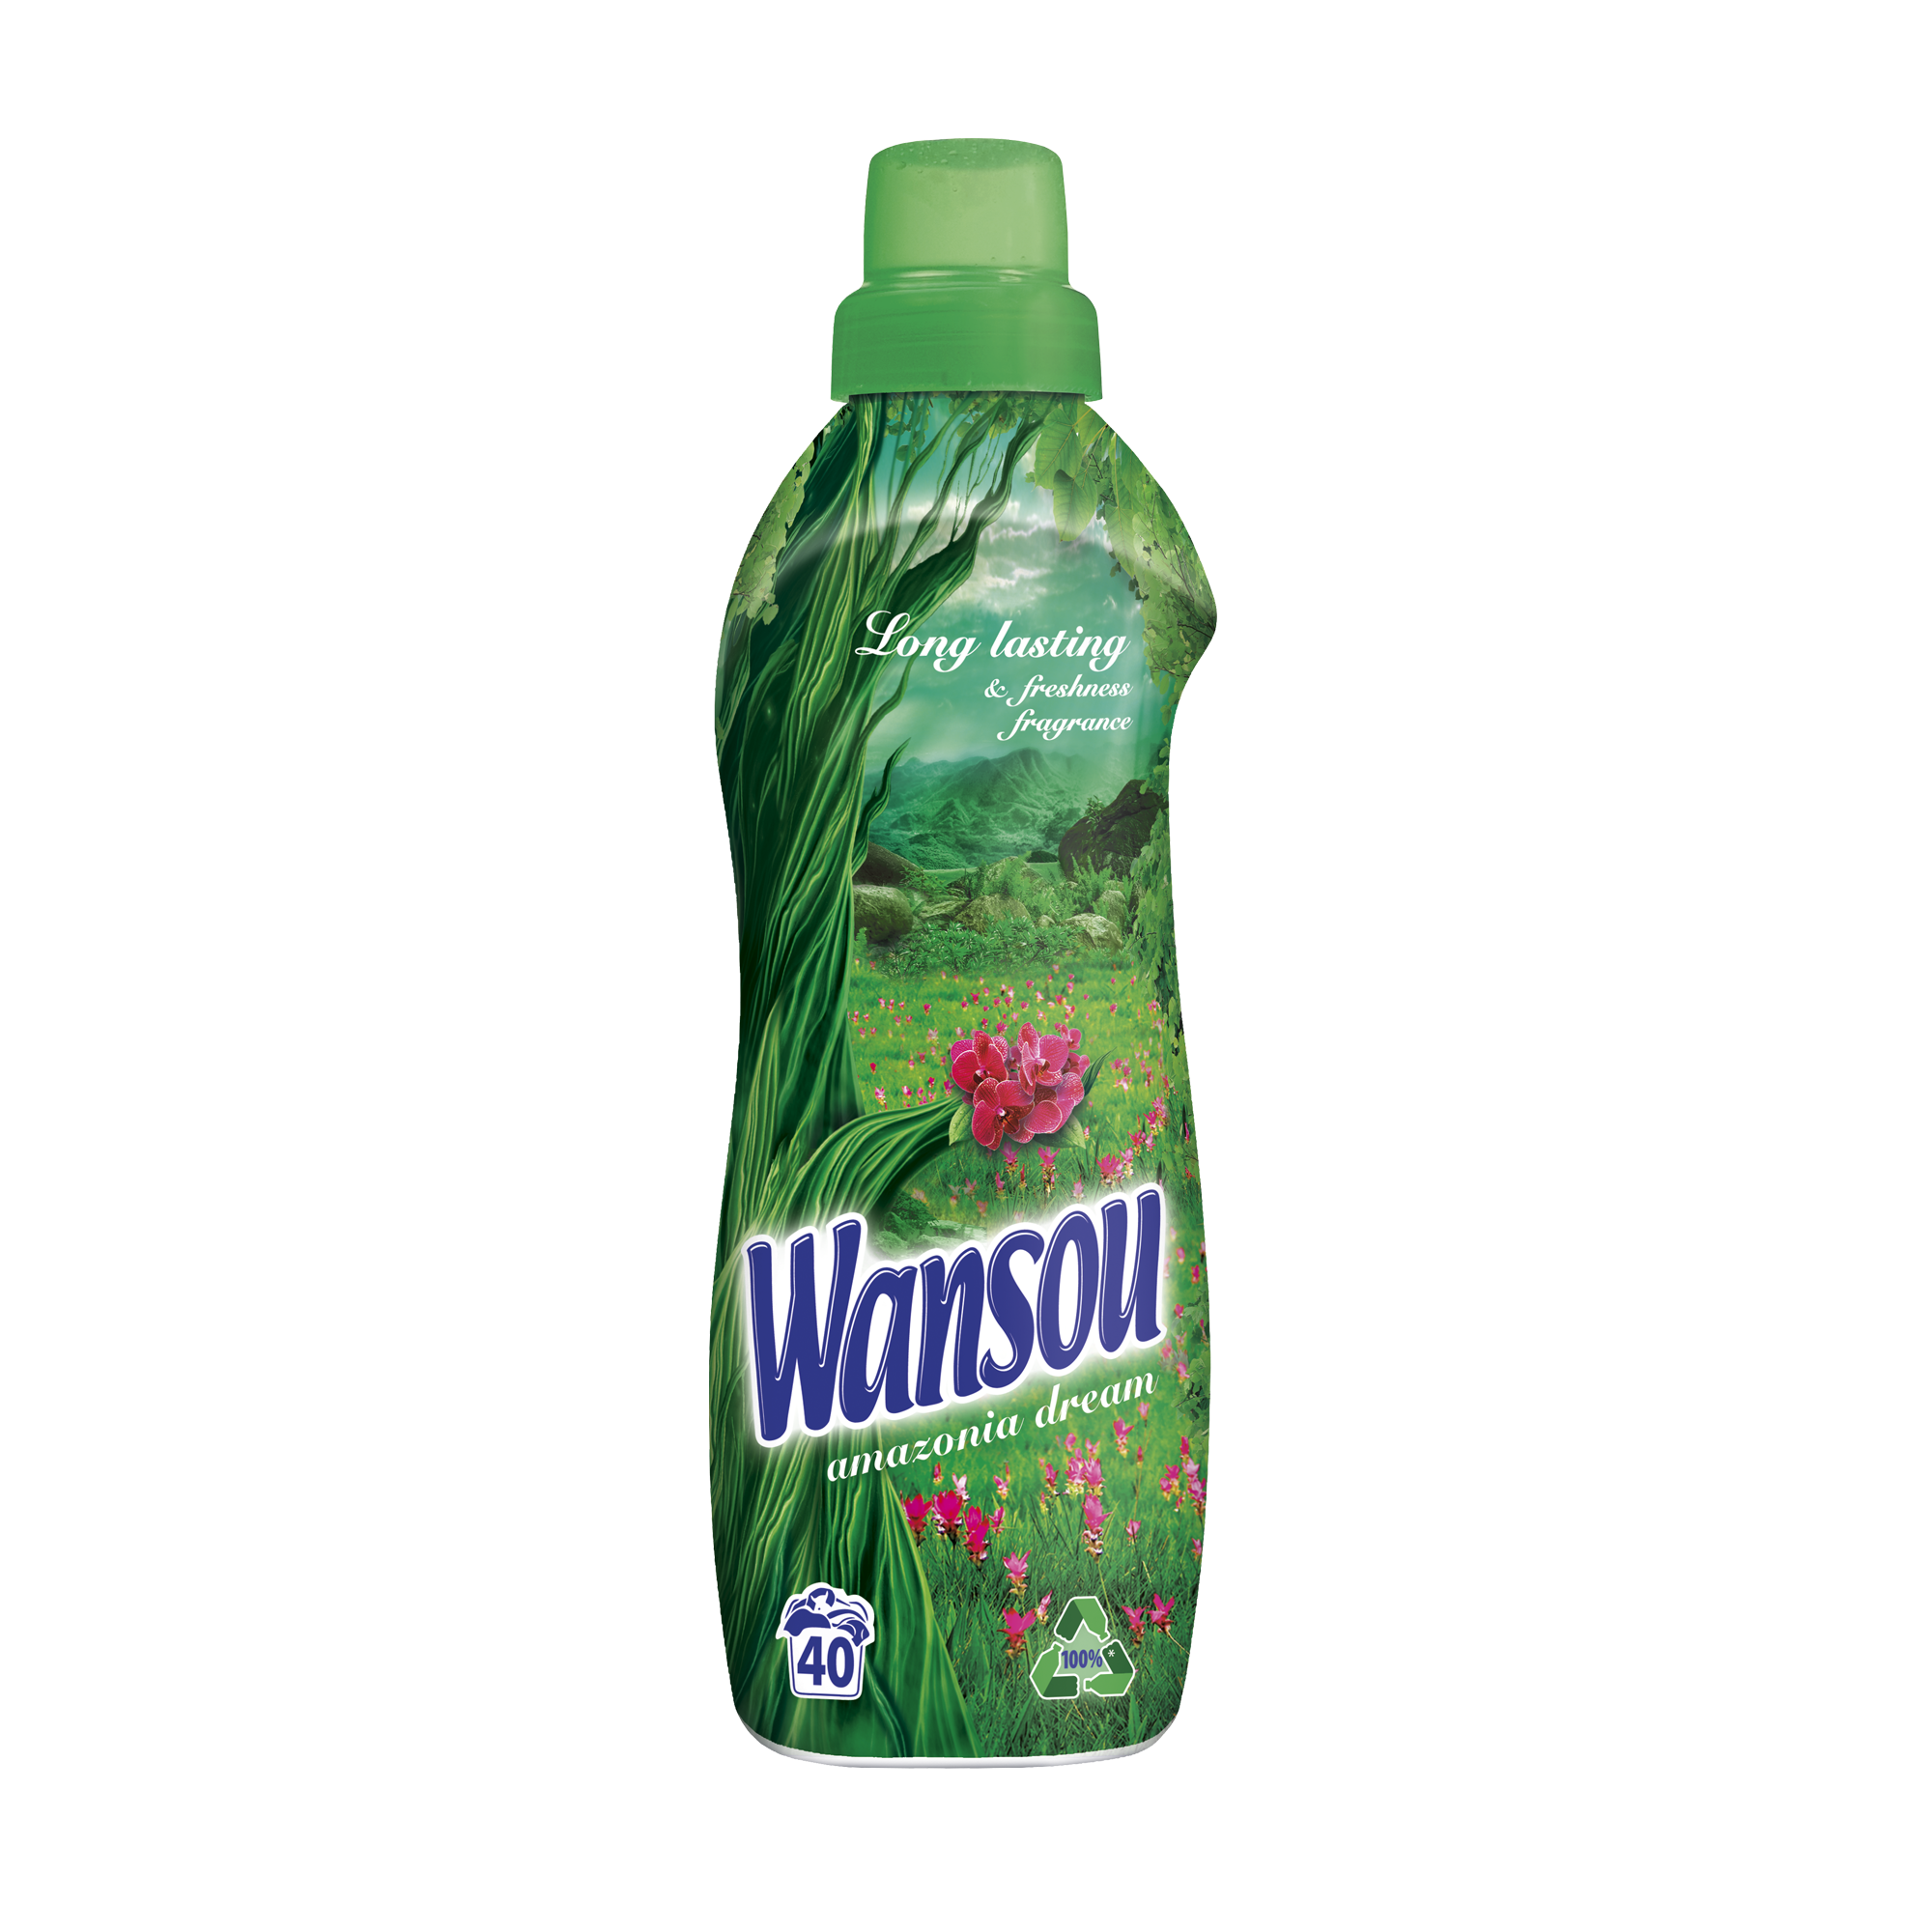 Wansou concentrated fabric softener Amazonia Dream